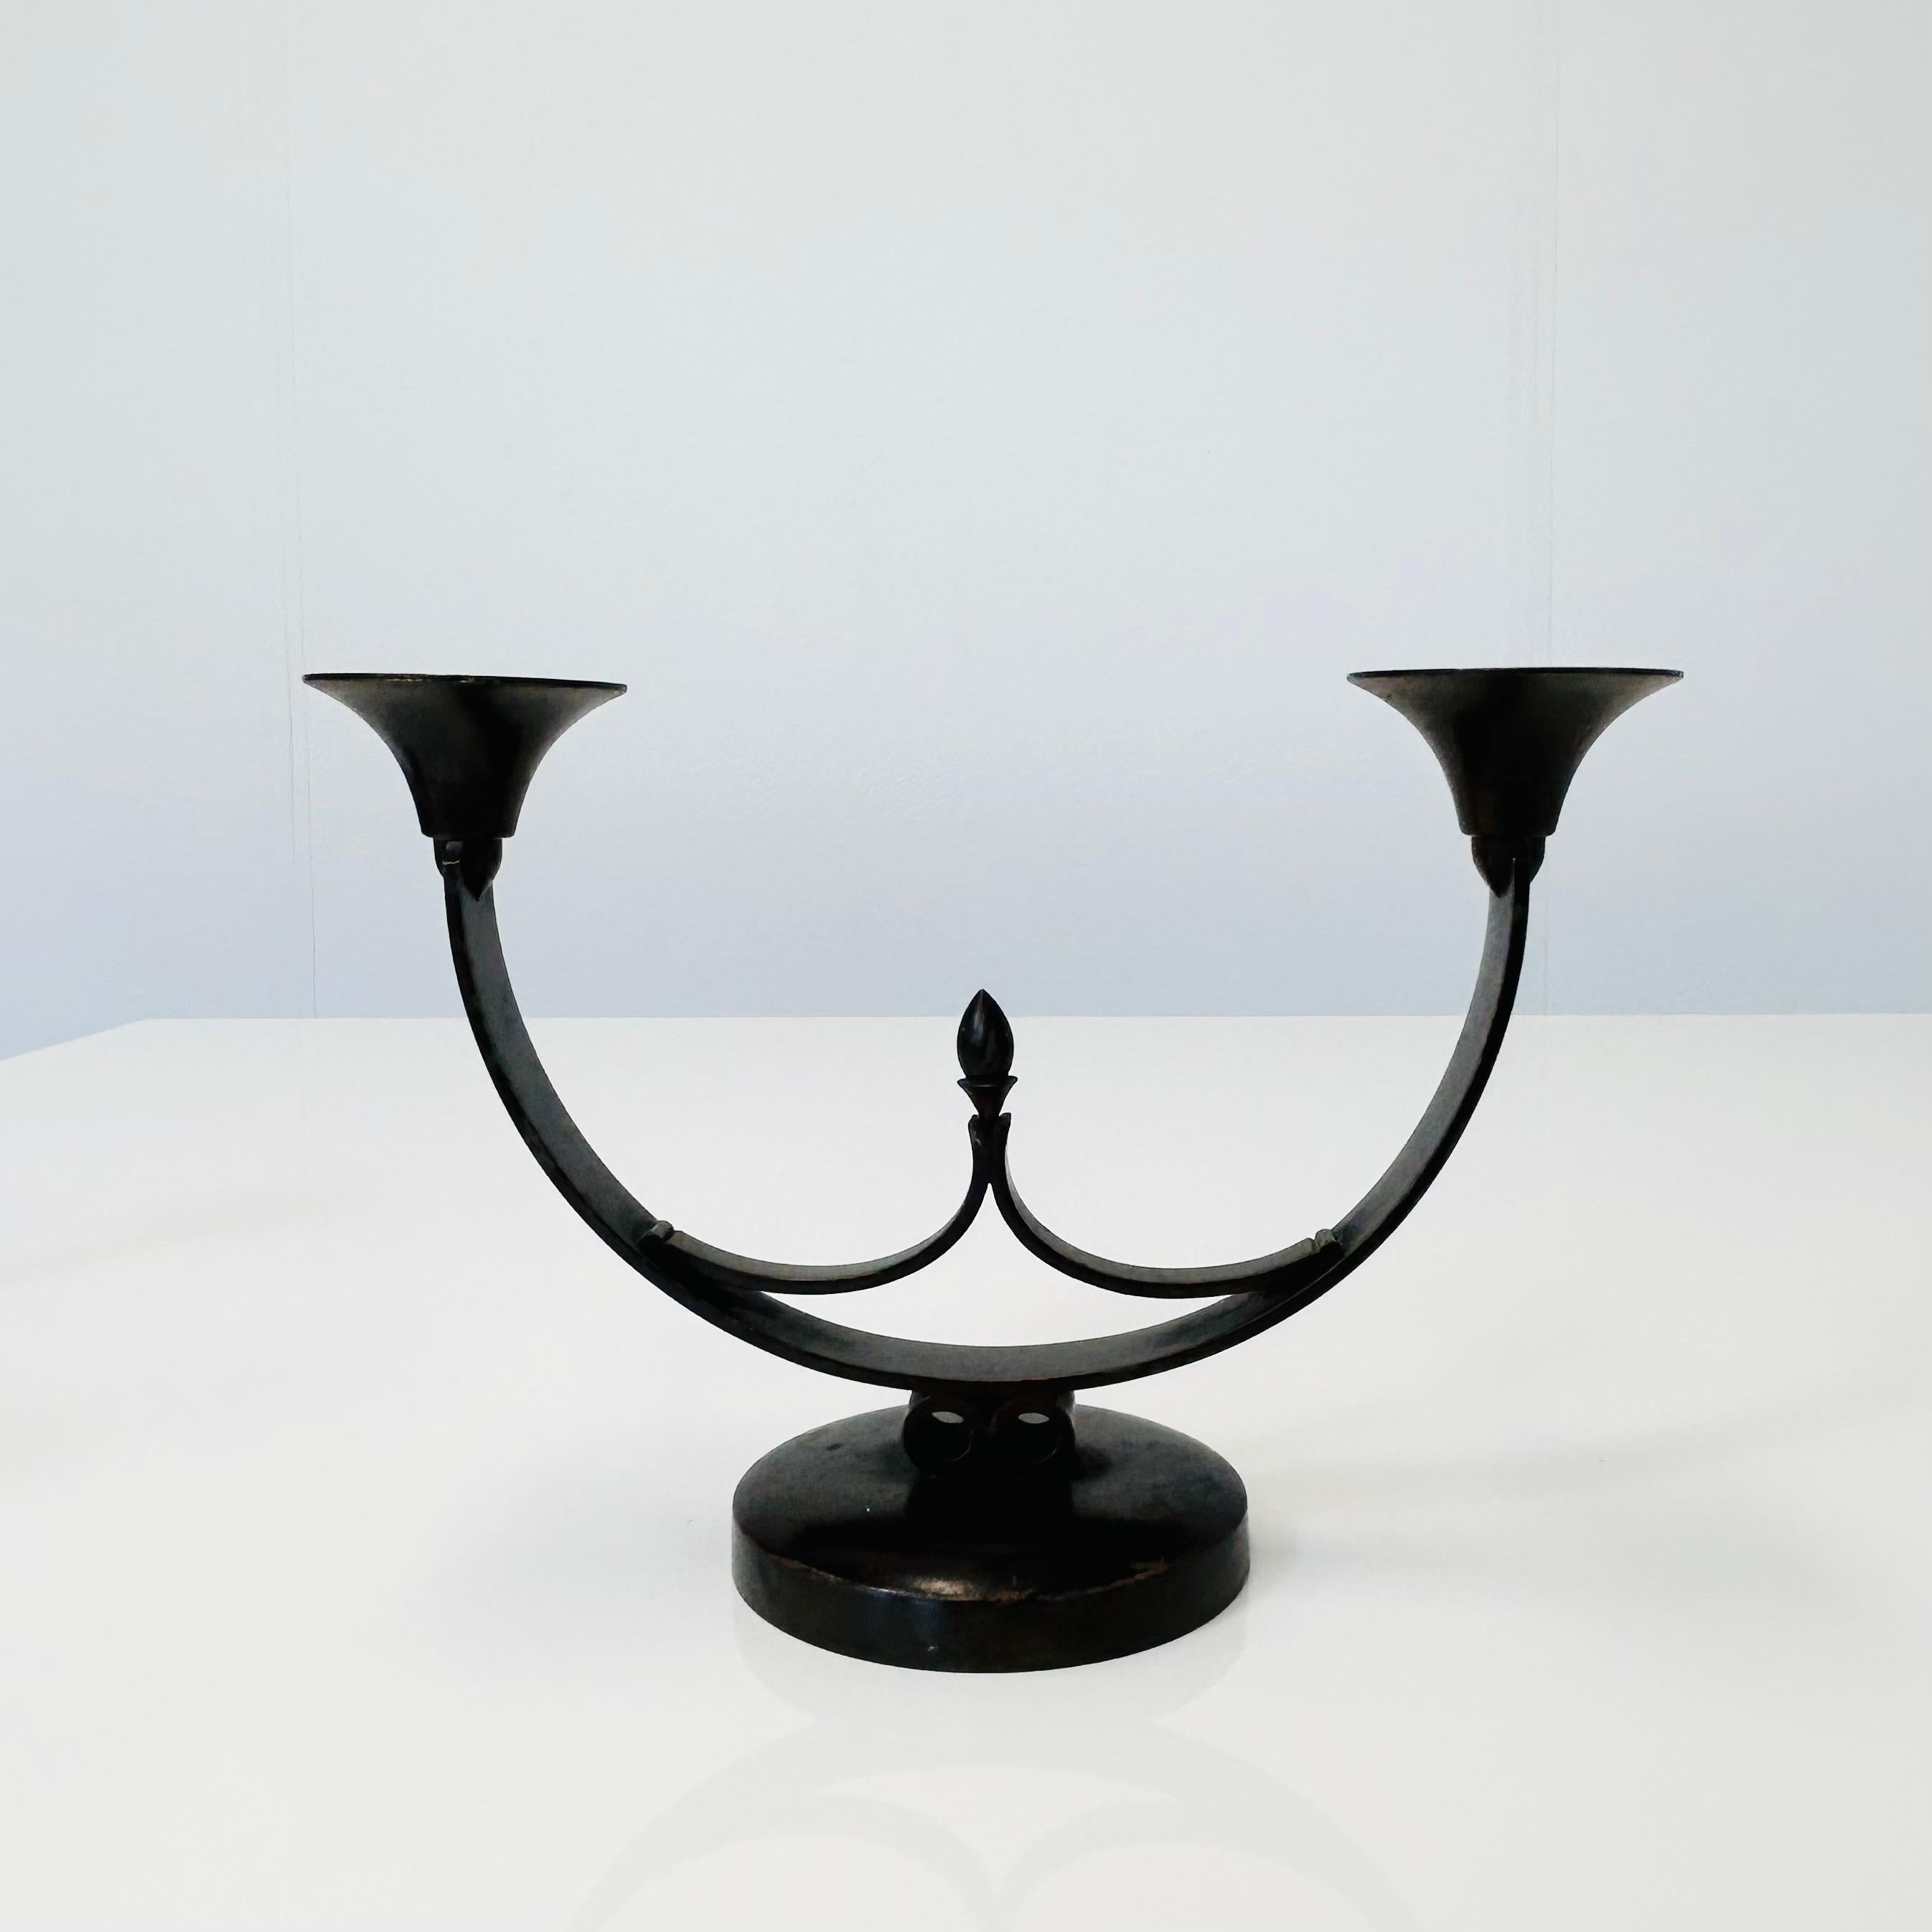 Pair of Light Bronze Candle Holders by Just Andersen, 1930s, Denmark For Sale 3